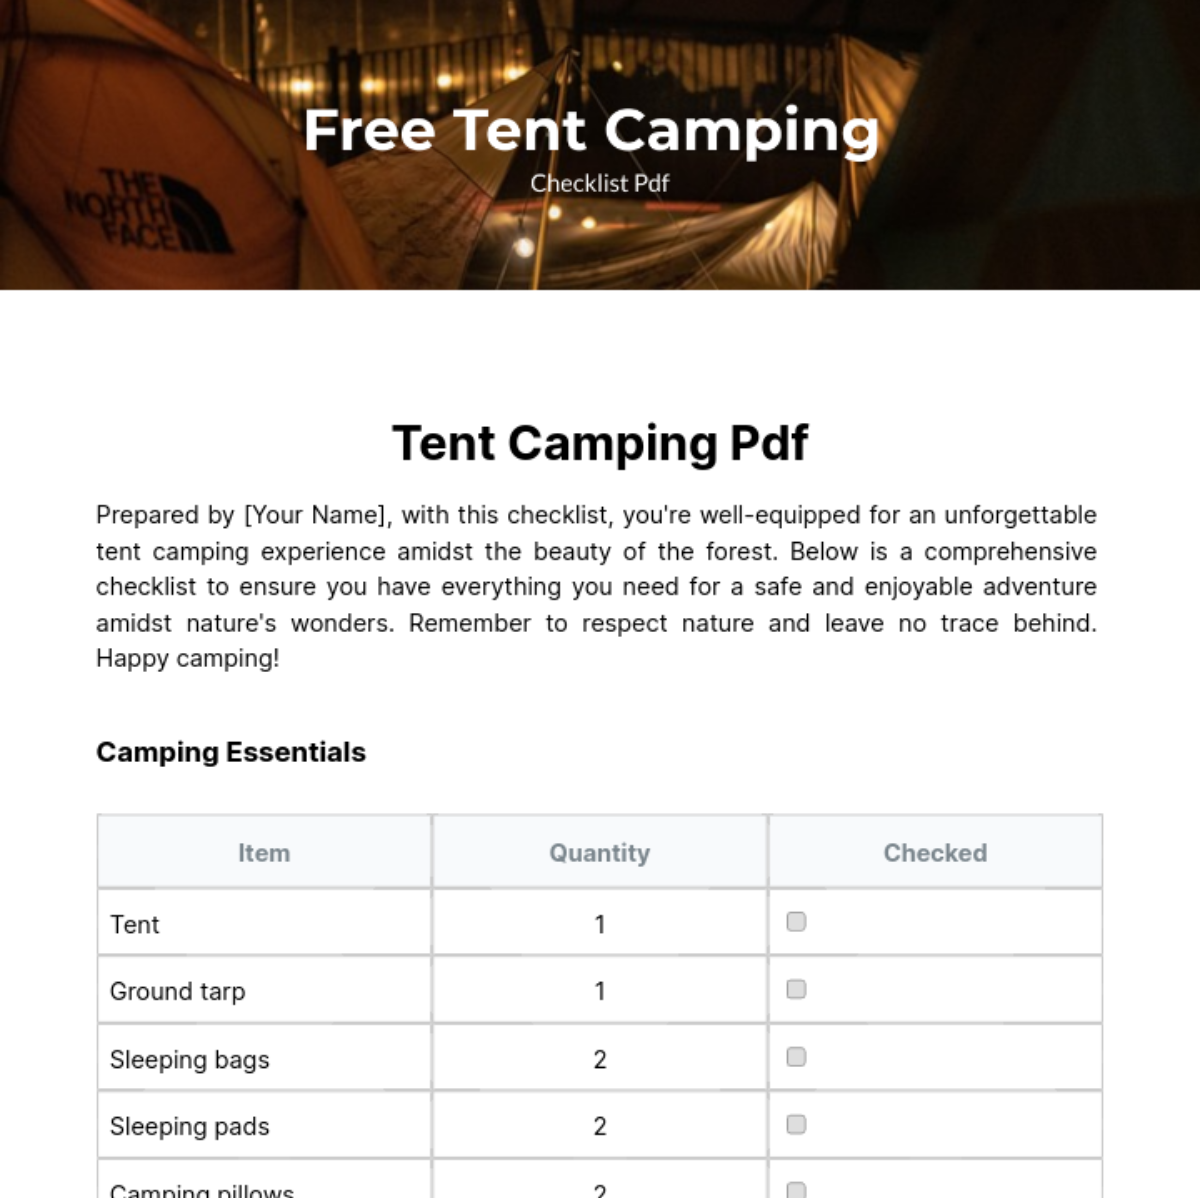 Free Tent Camping Checklist Pdf Template